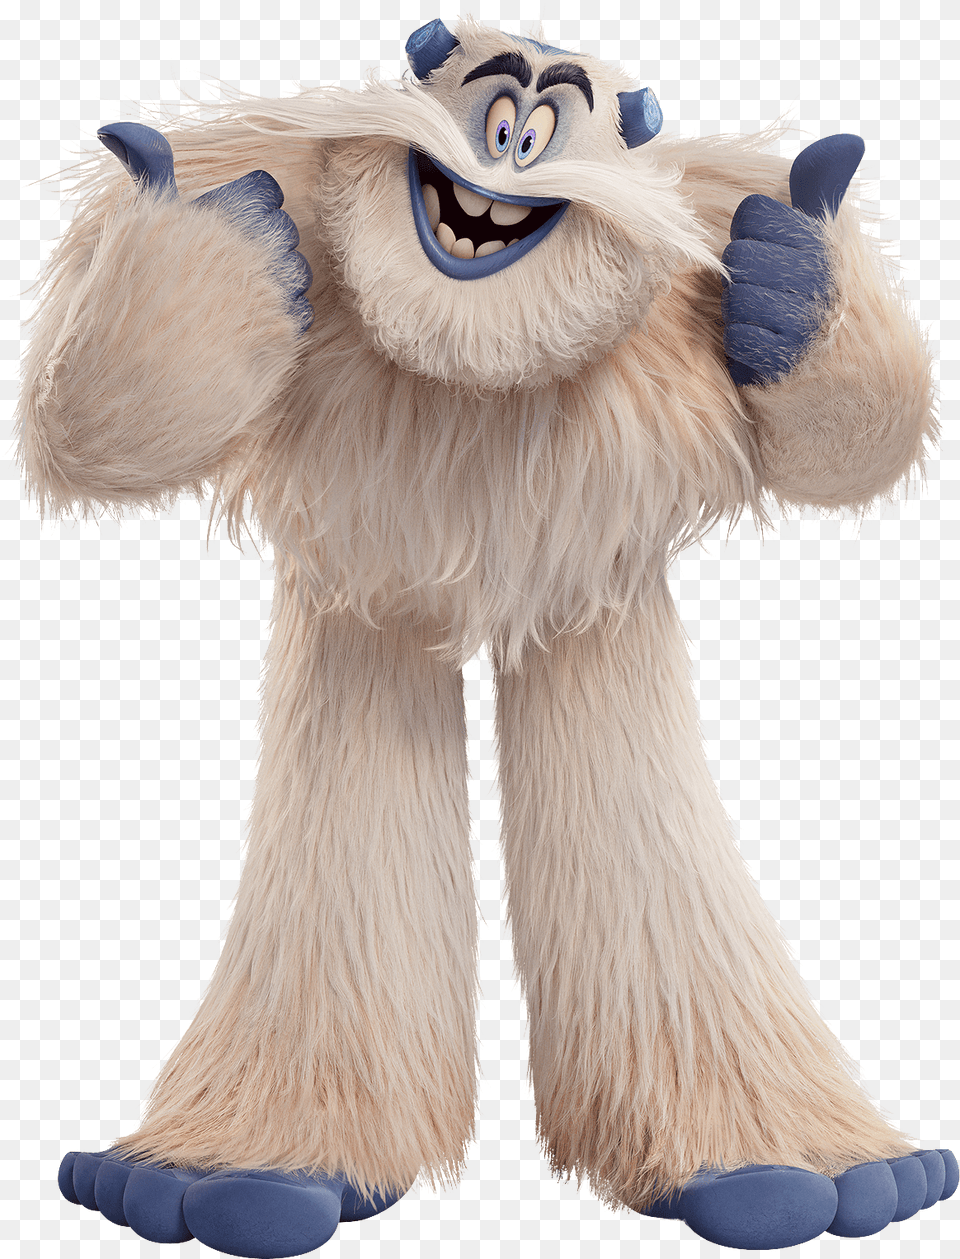 Smallfoot Dorgle Yeti Thumbs Up, Mascot, Toy Png